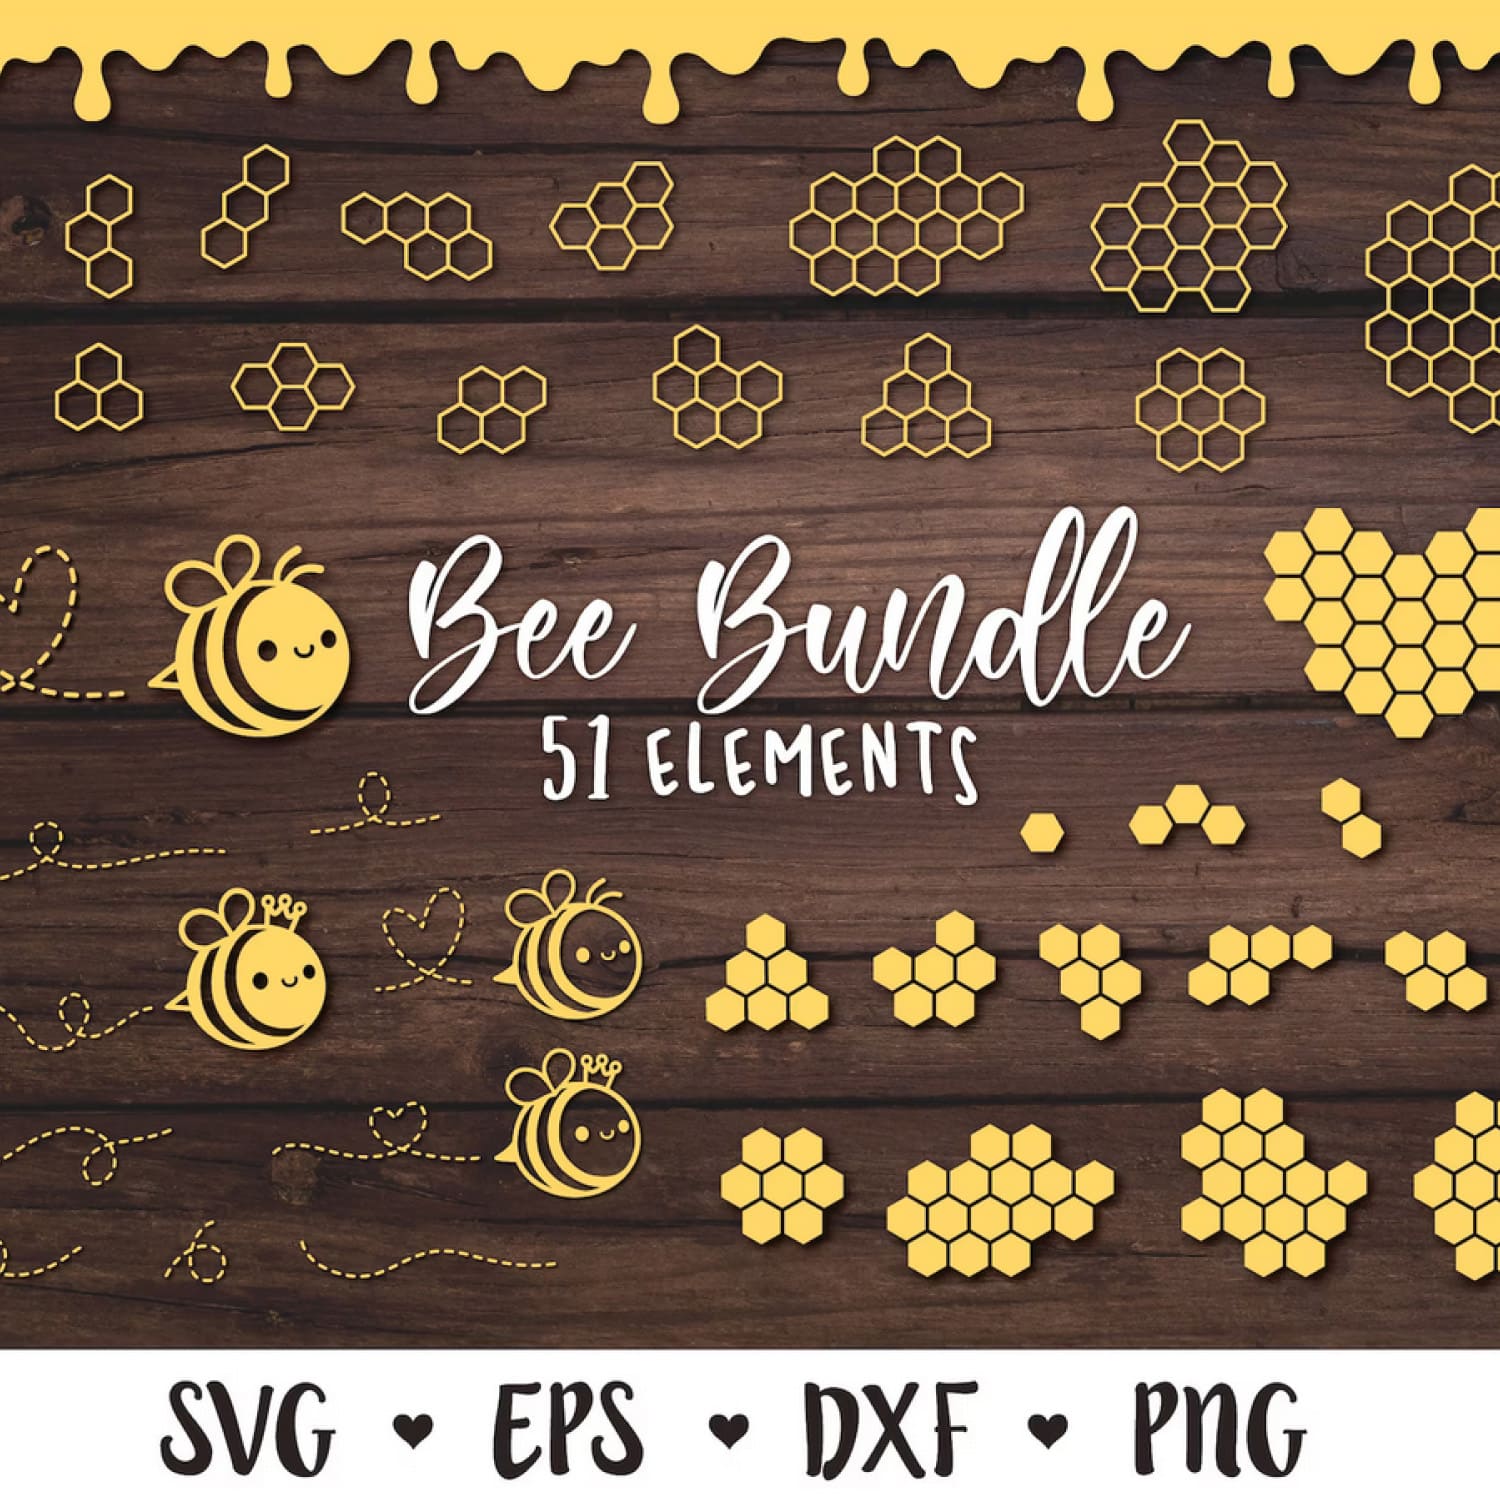 Bees and honeycombs svg bundle.